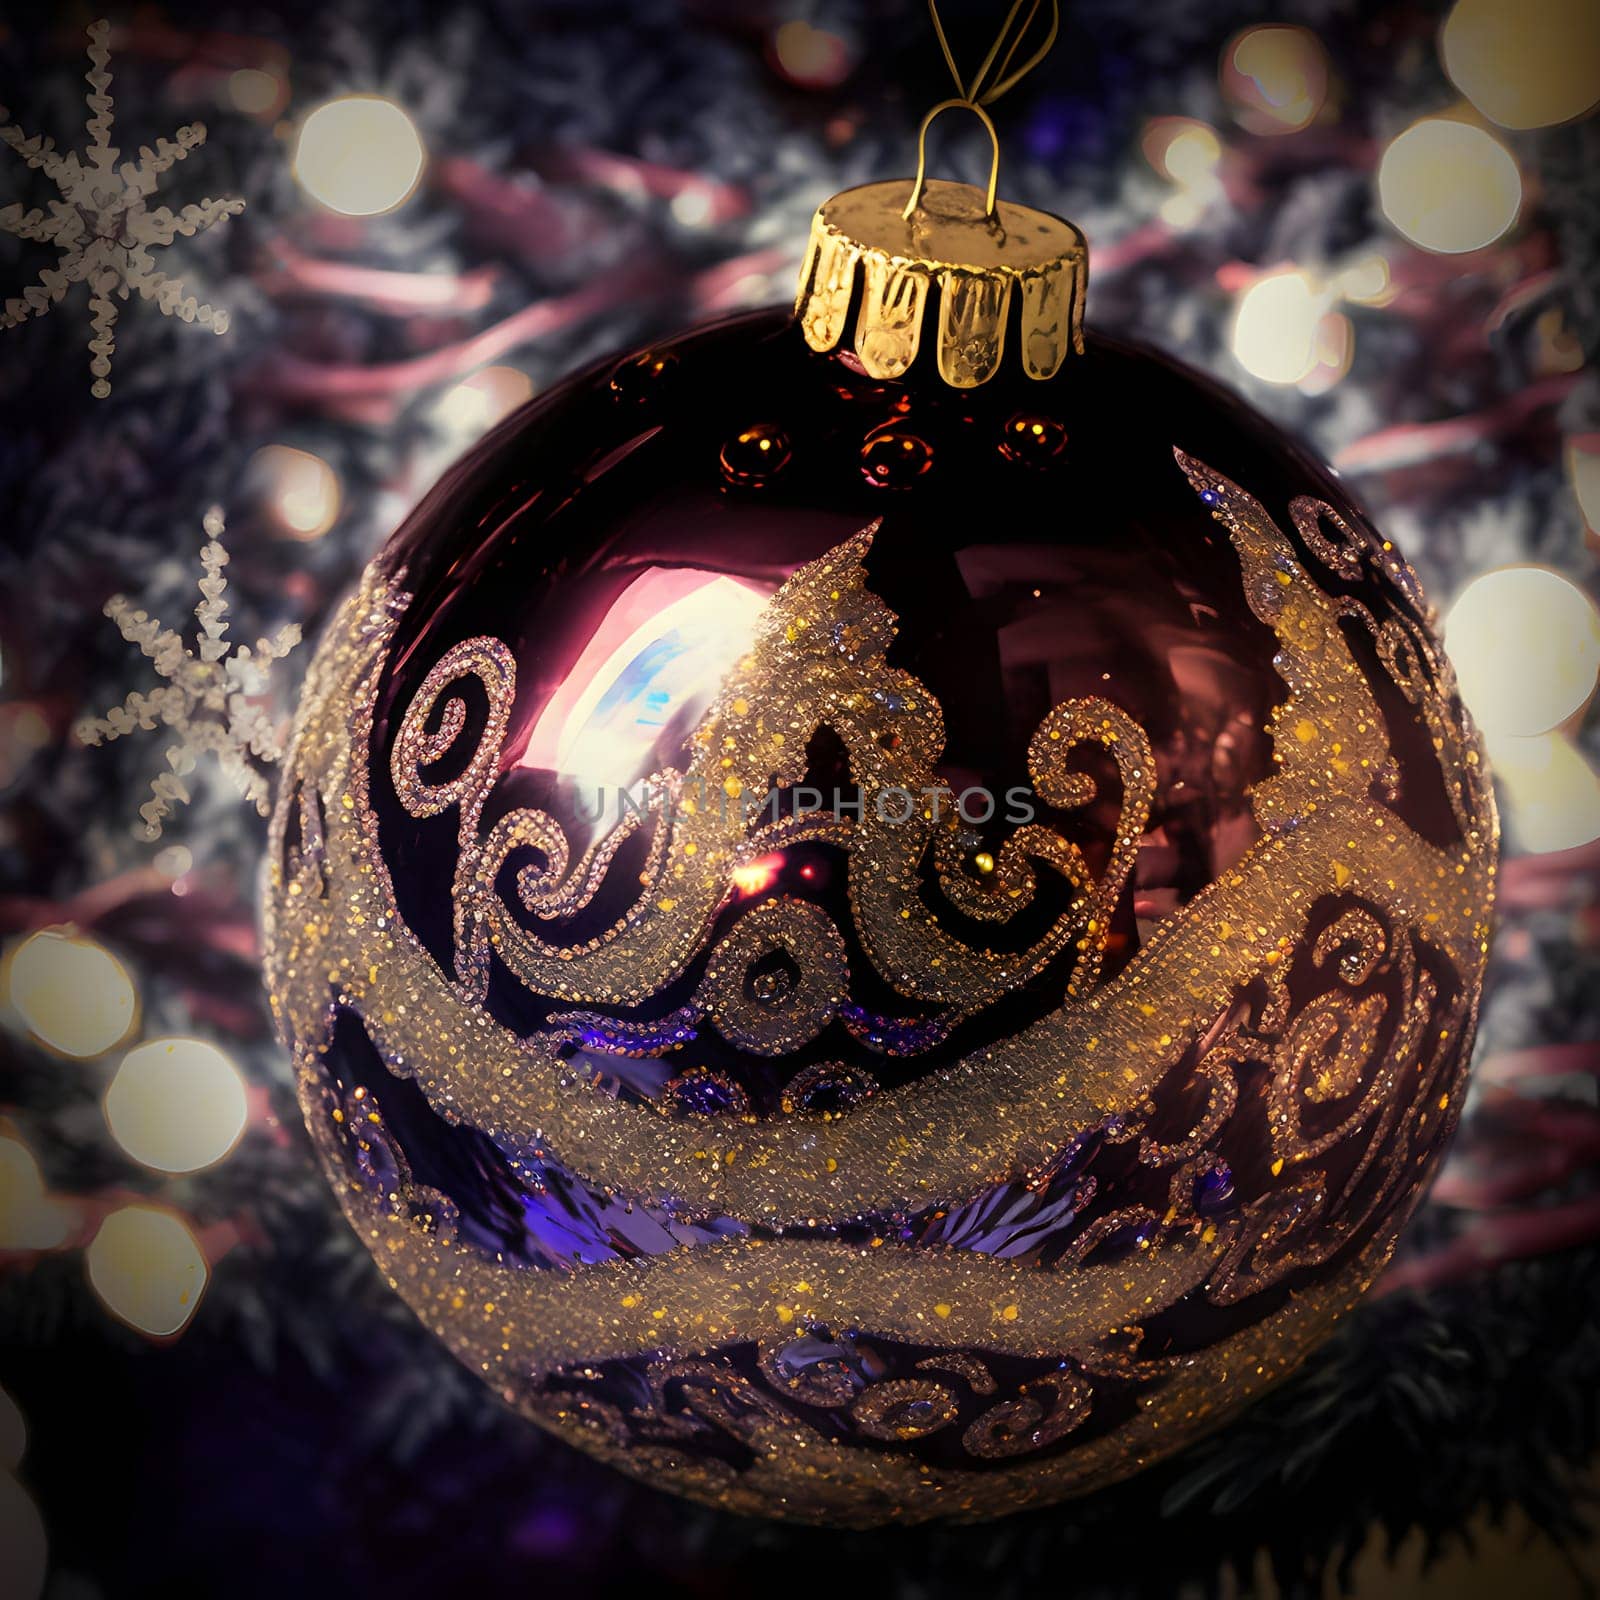 closeup of ornate magenta christmas ball, neural network generated art. Digitally generated image. Not based on any actual scene or pattern.